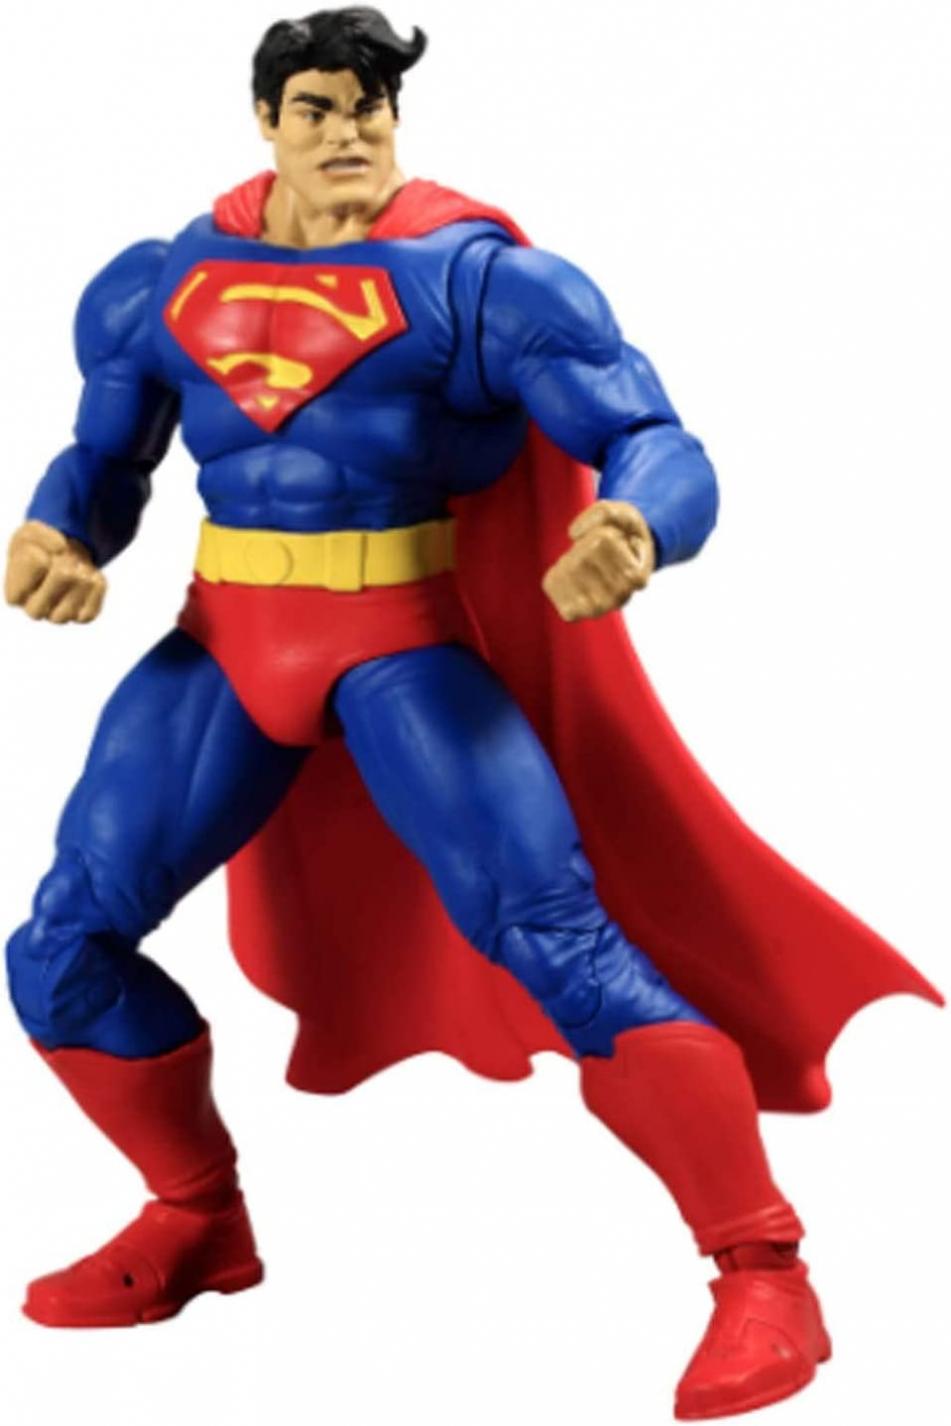 DC Multiverse The Dark Knight Returns Superman 7" Action Figure with Build-A Horse Parts & Accessories